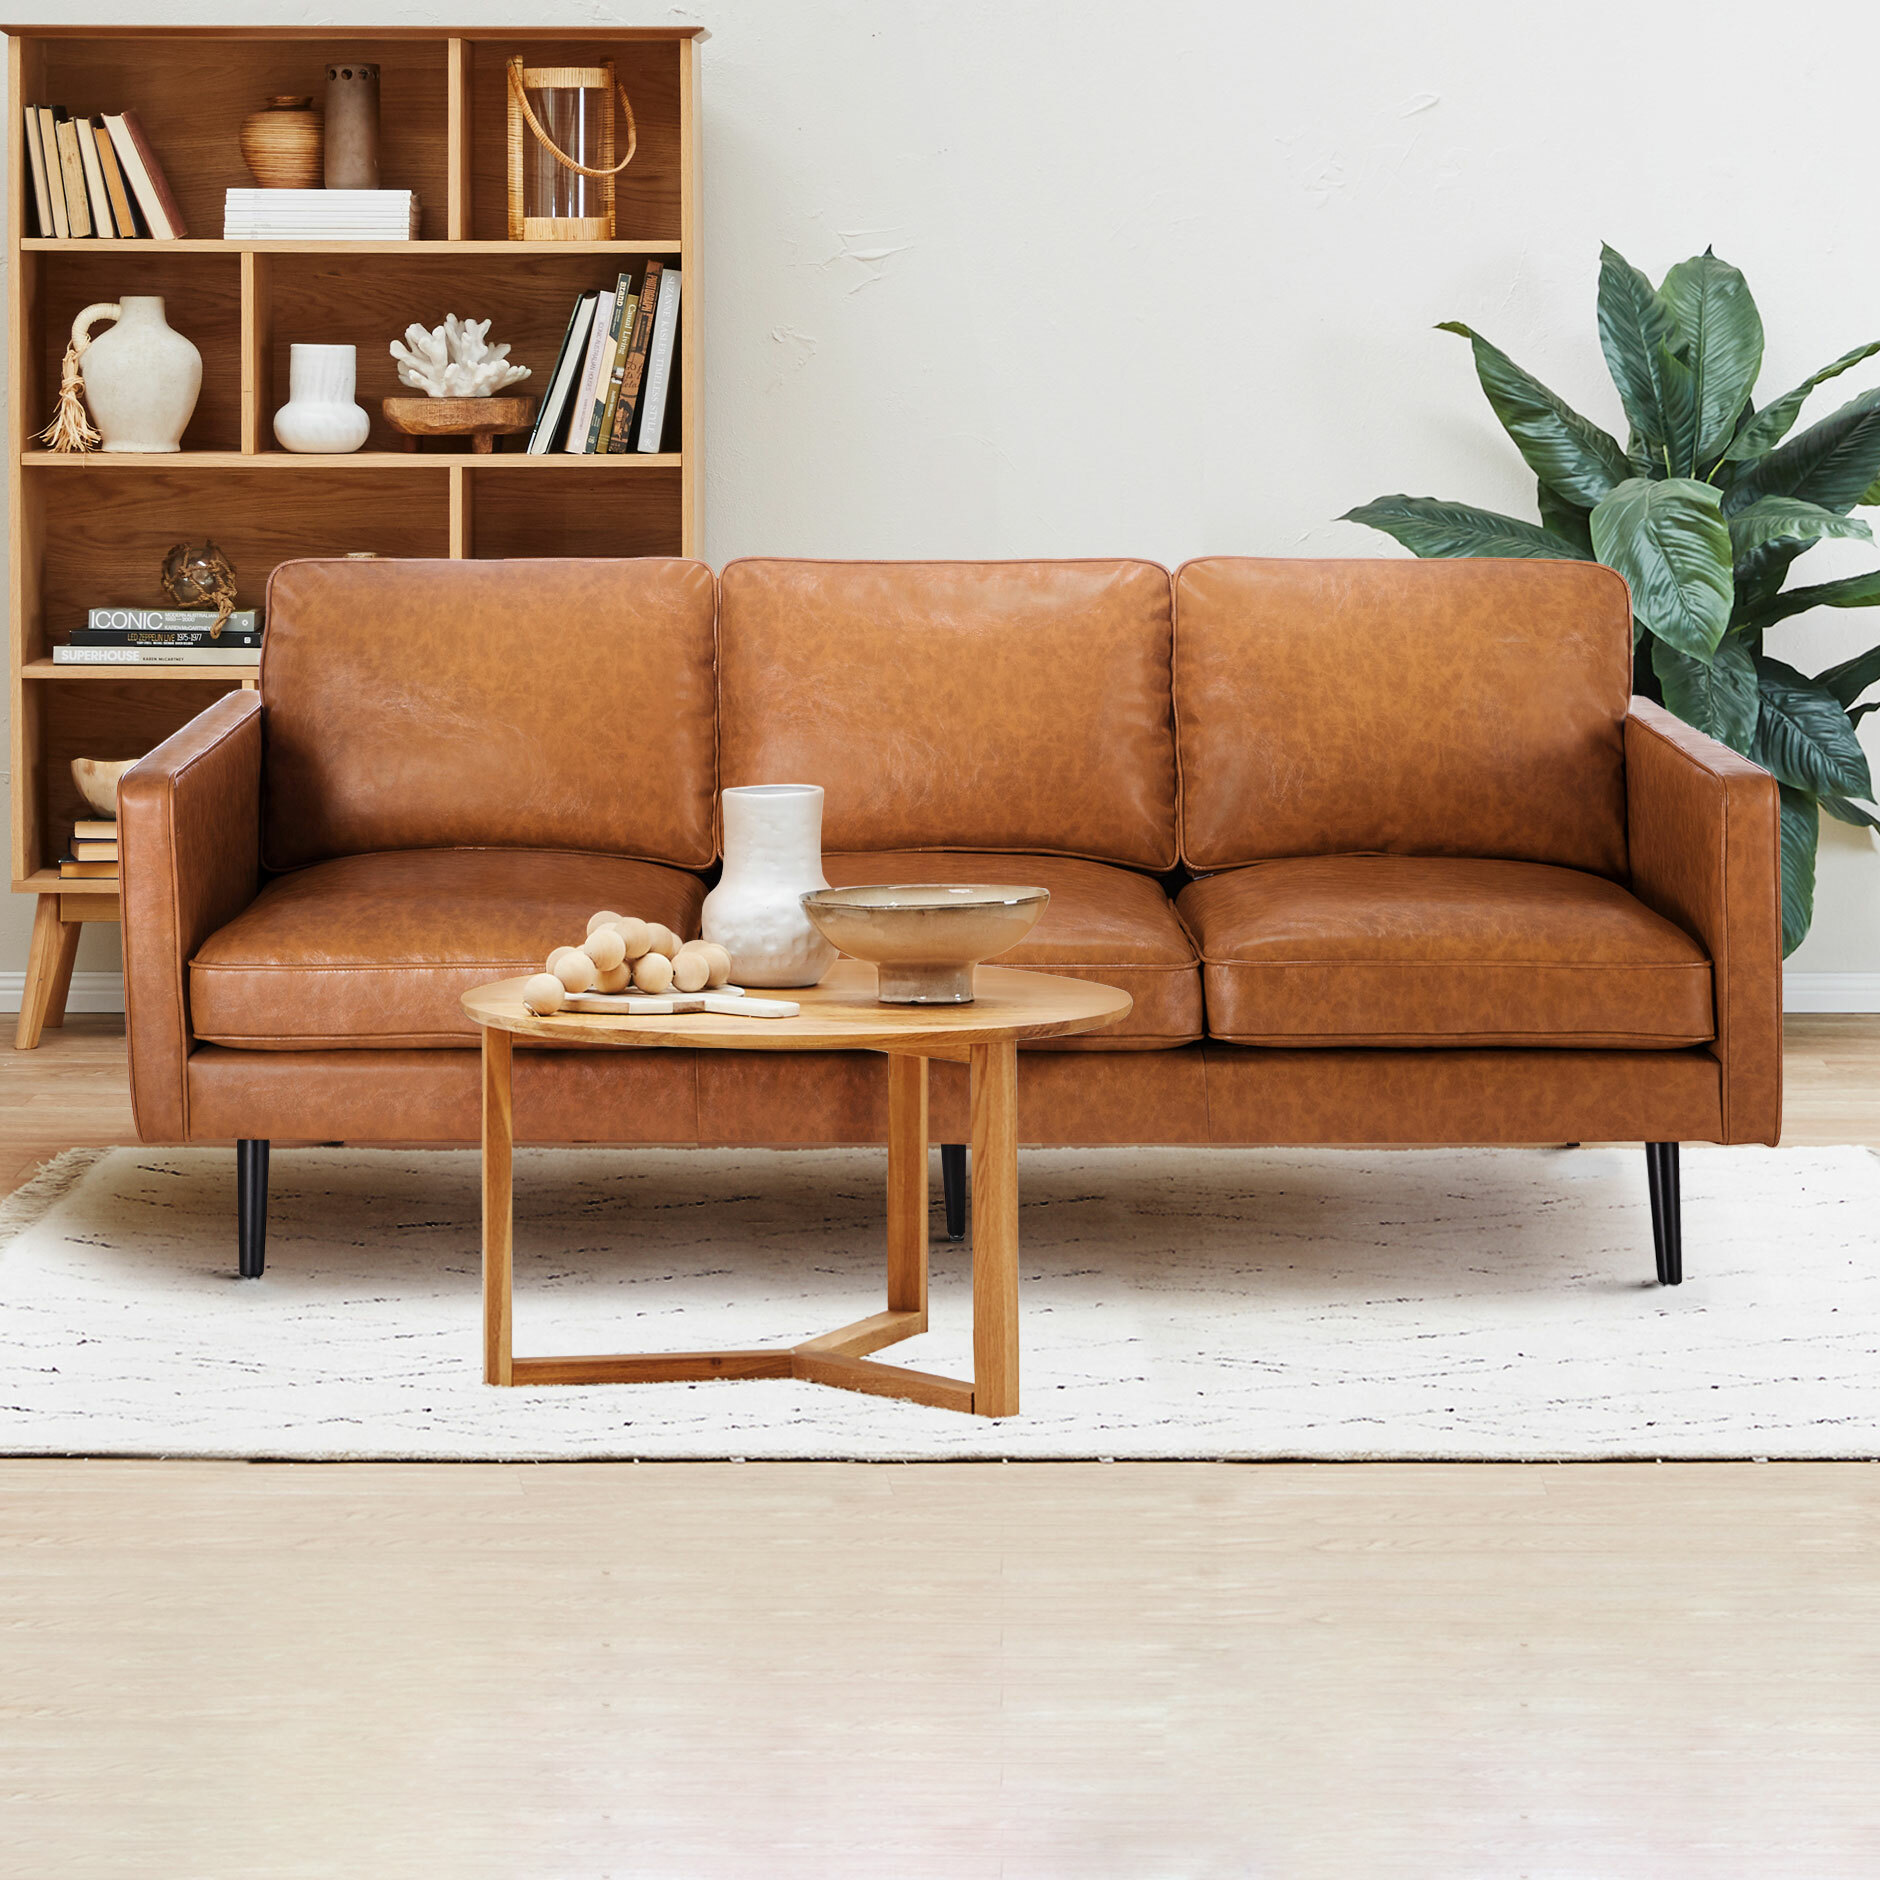 Temple Webster Tan Carlo Faux Leather, Faux Leather Upholstery Fabric Australia